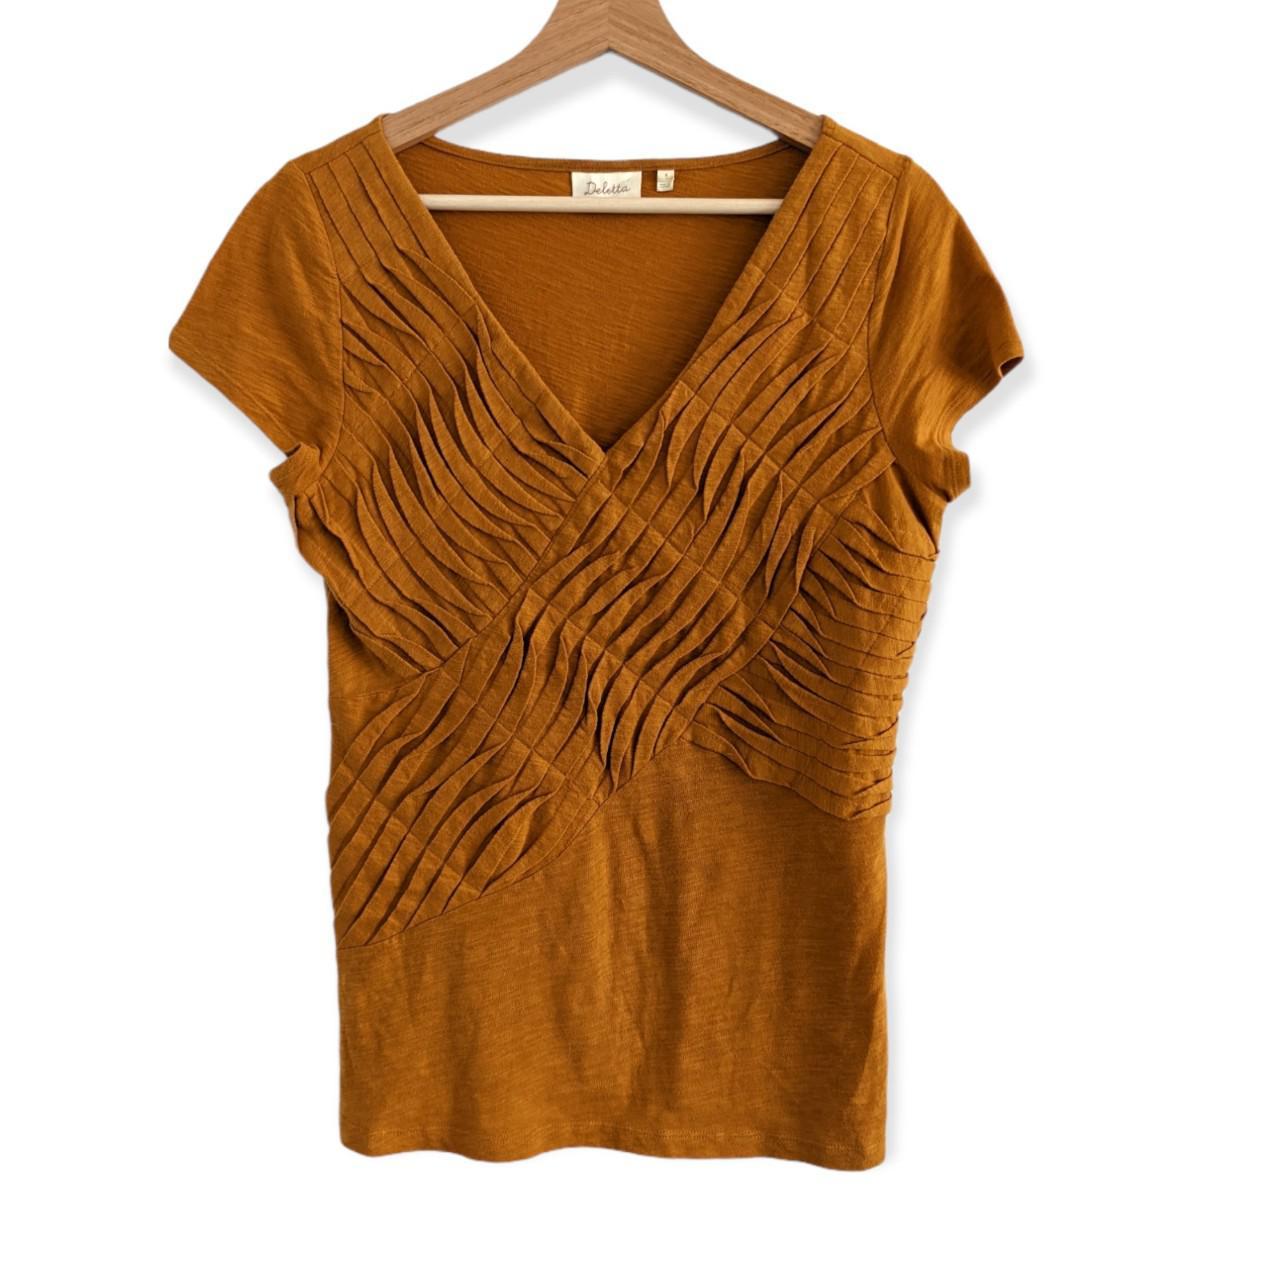 Product Image 1 - Tumeric Gold Textured Pleat Top

Lovely